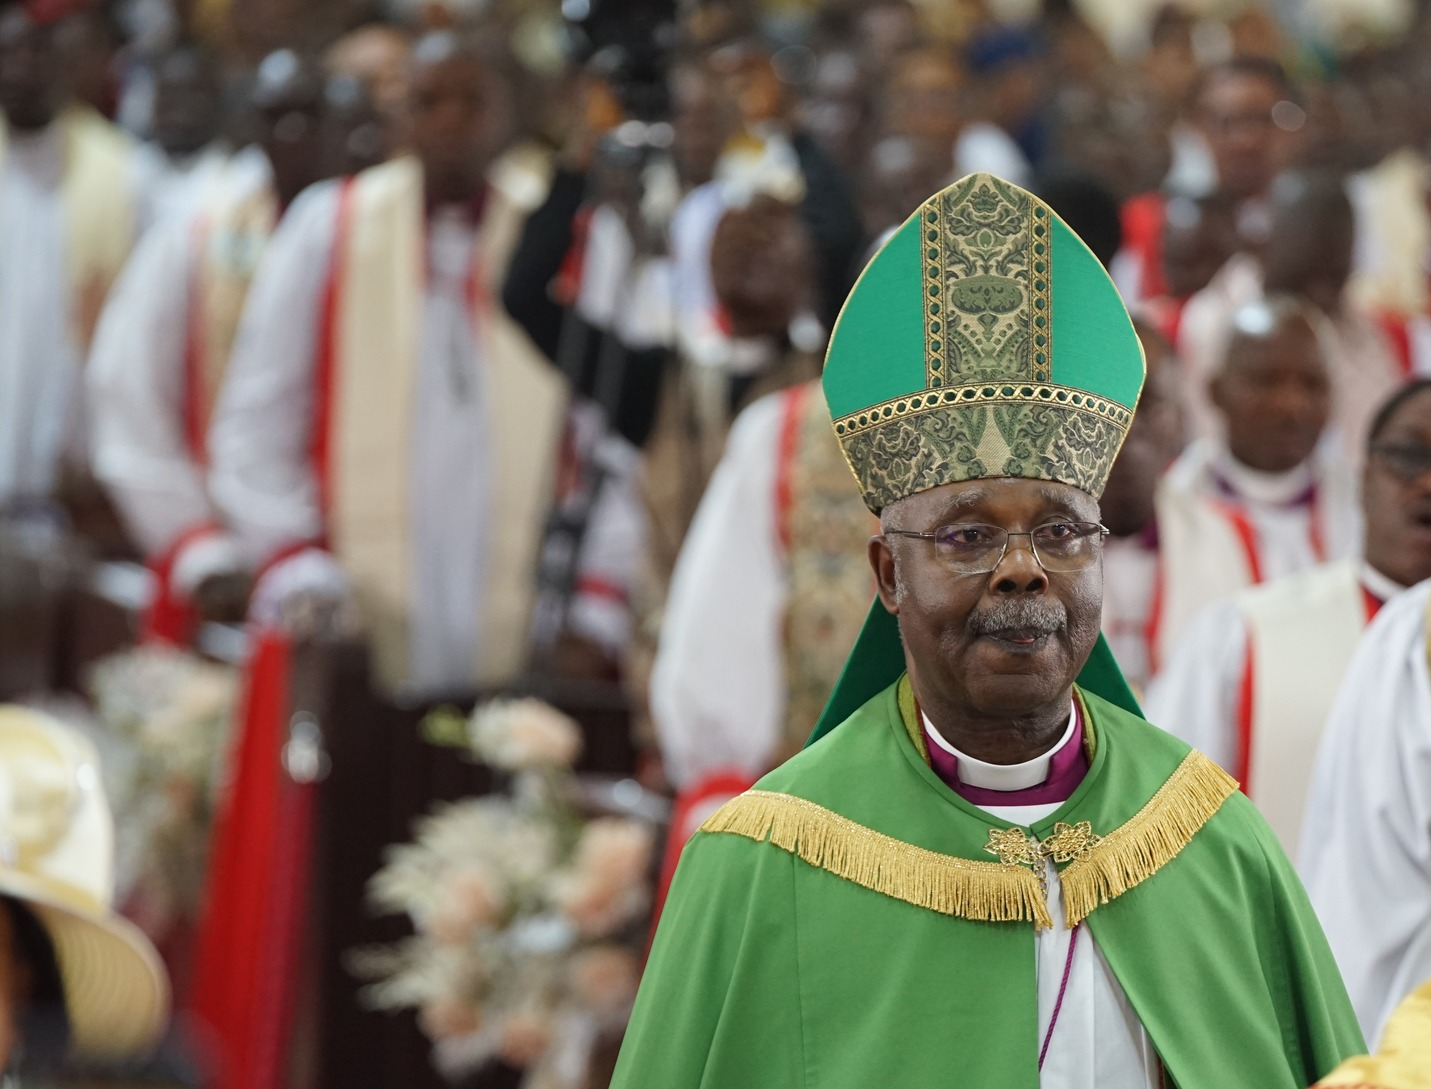 THE PROFILE OF MOST REV’D DR. MICHAEL OLUSINA FAPE, ARCHBISHOP, PROVINCE OF LAGOS.